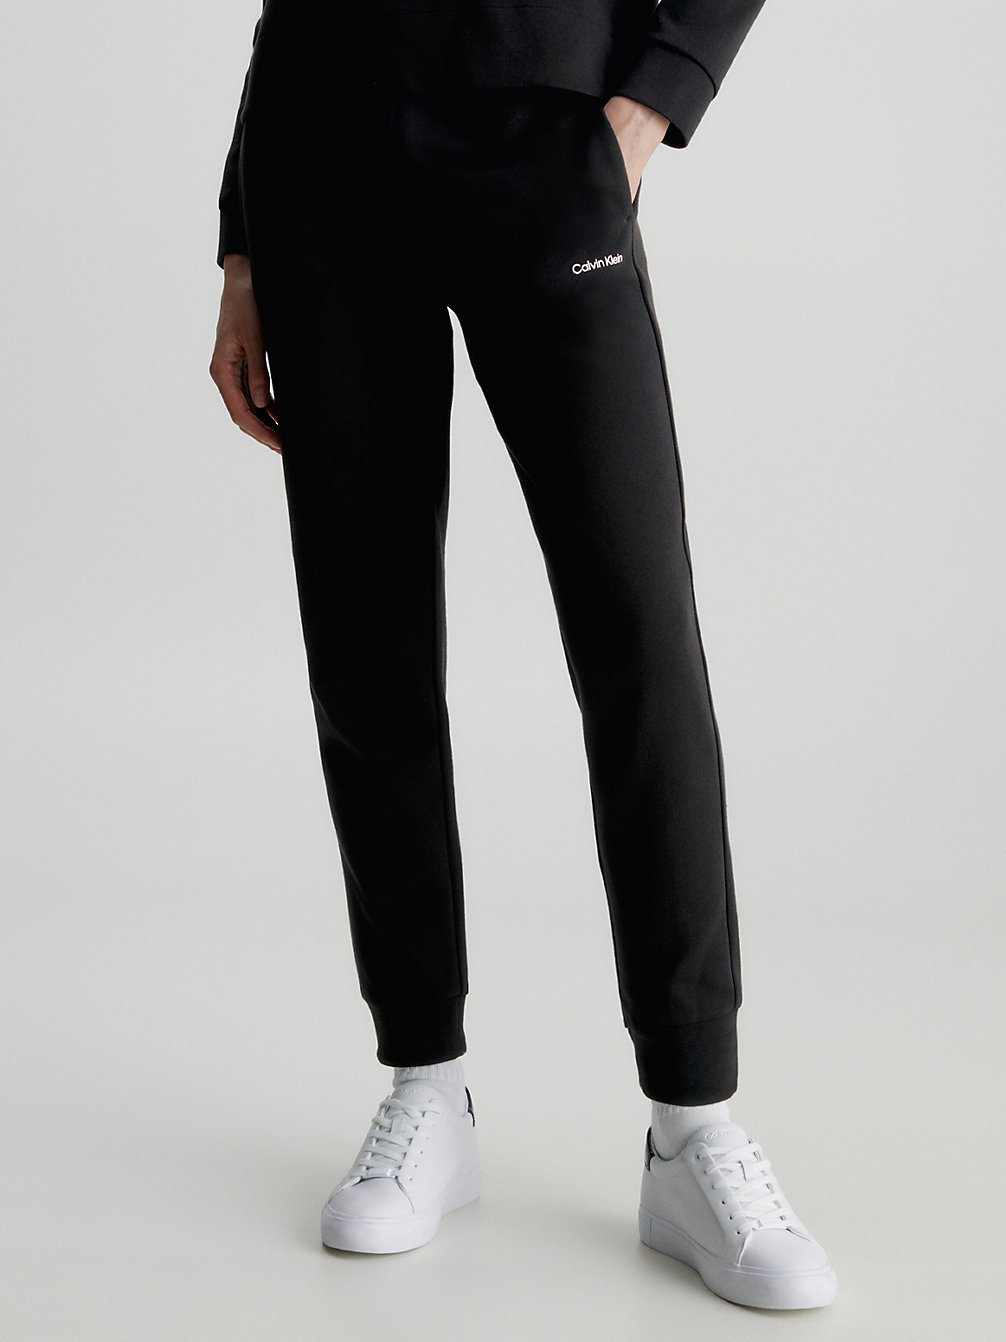 CK BLACK Slim Recycled Polyester Joggers undefined women Calvin Klein